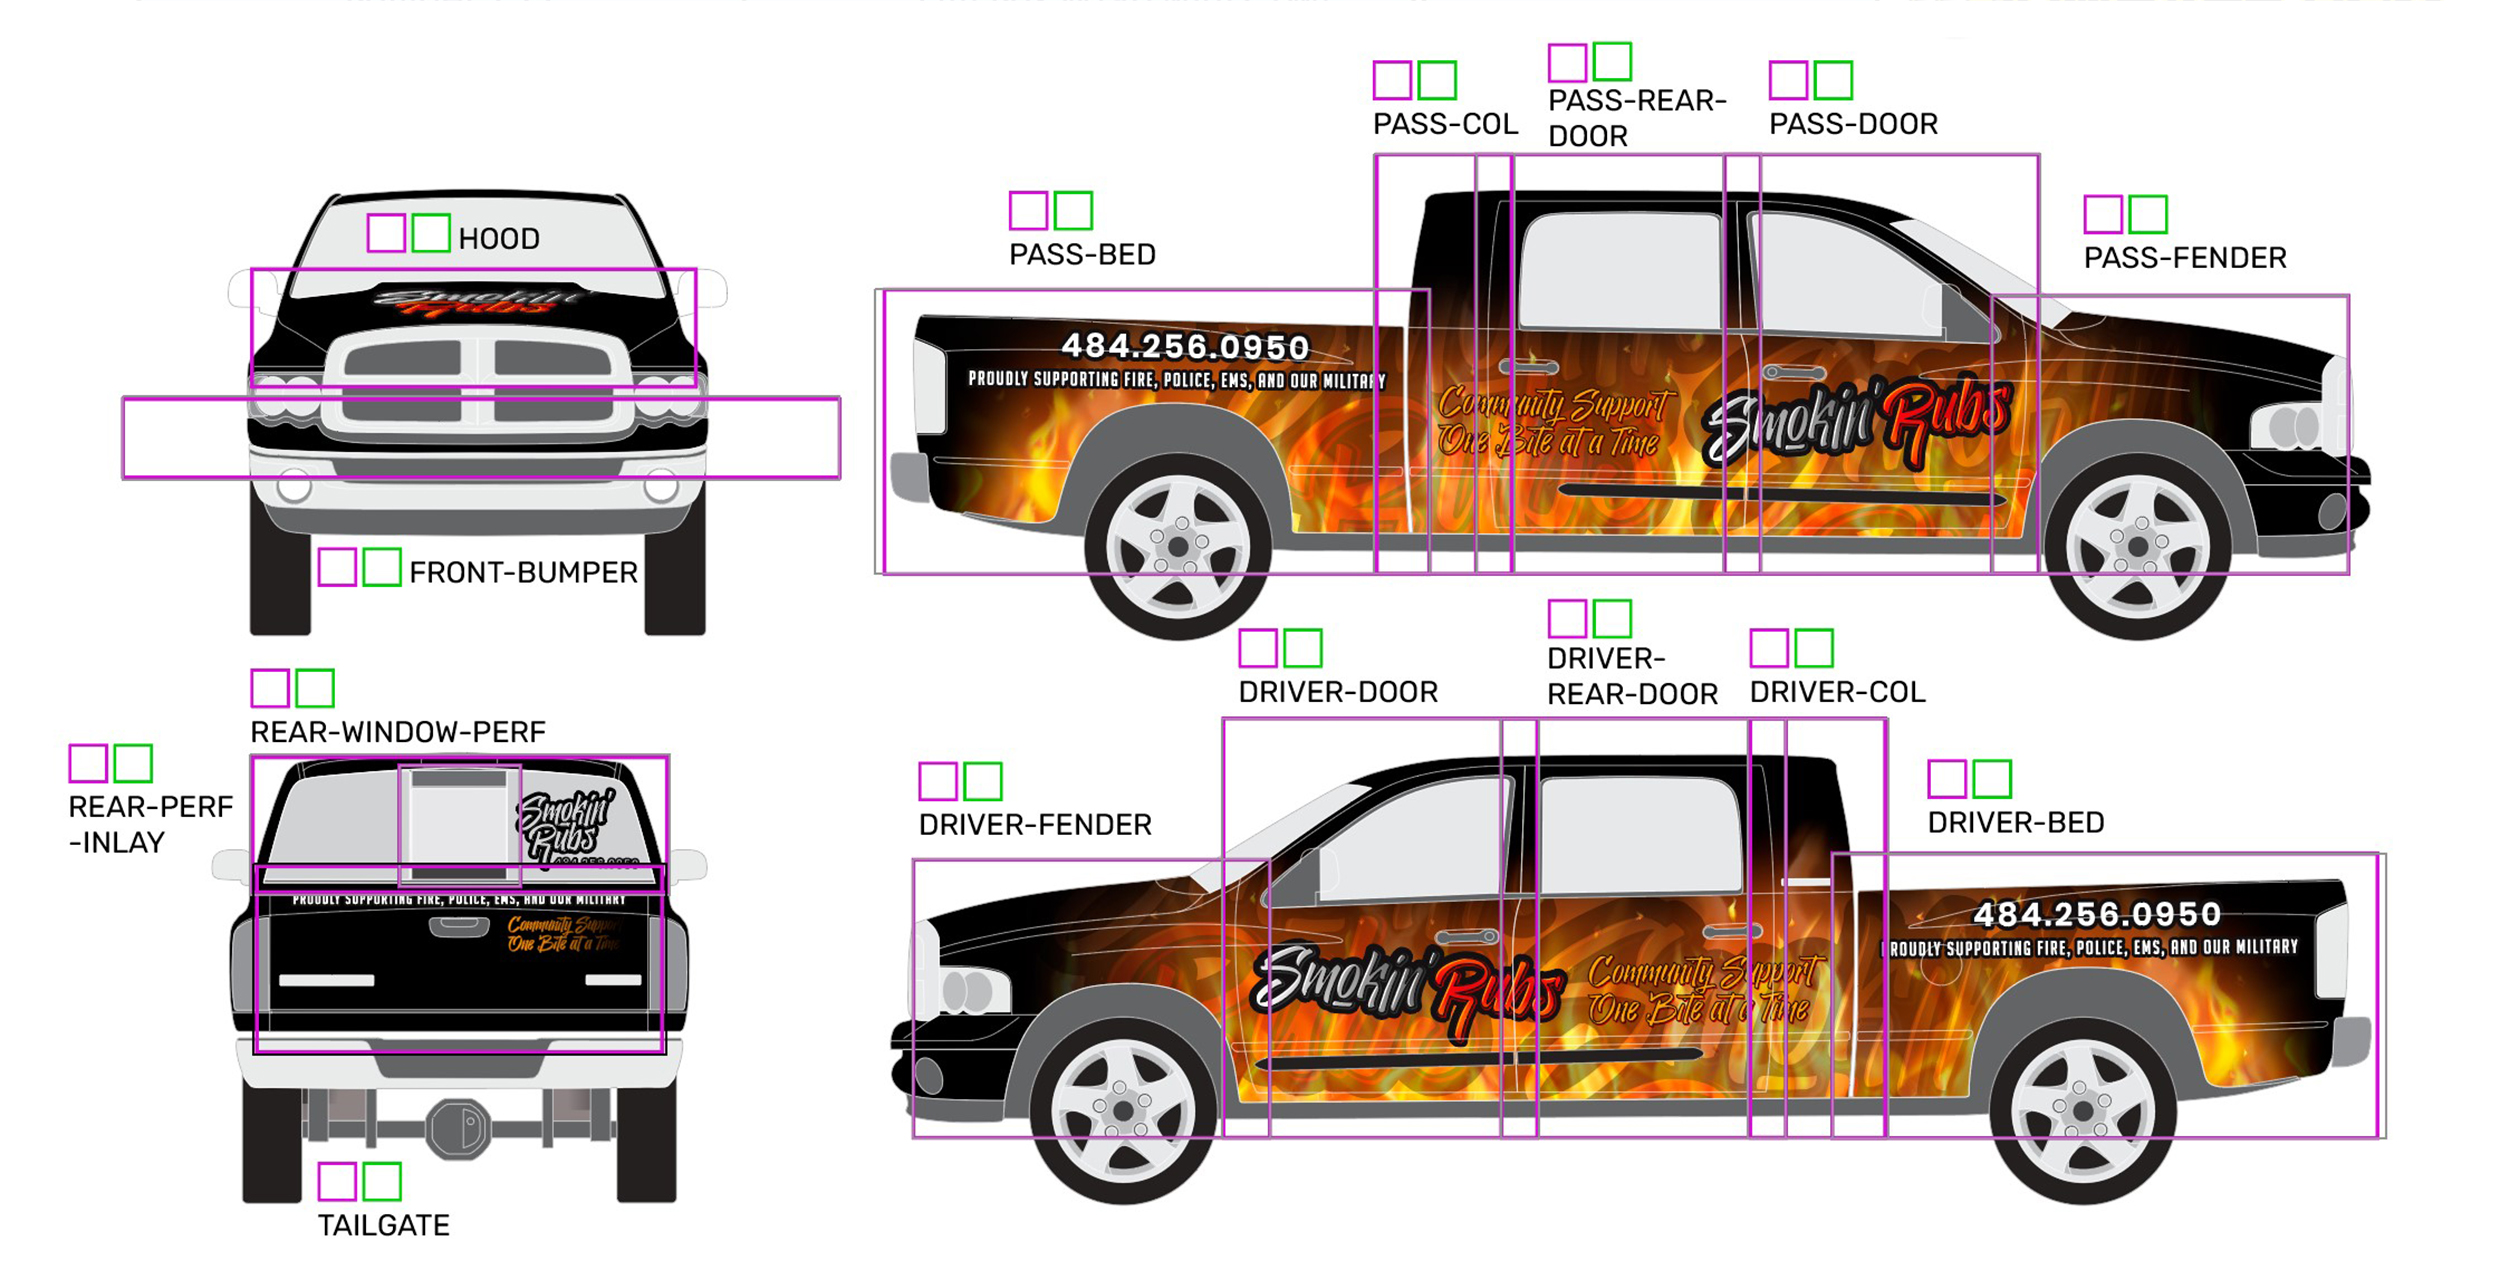 IDWraps creates panel maps for installers of their vehicle wraps and architectural graphics.